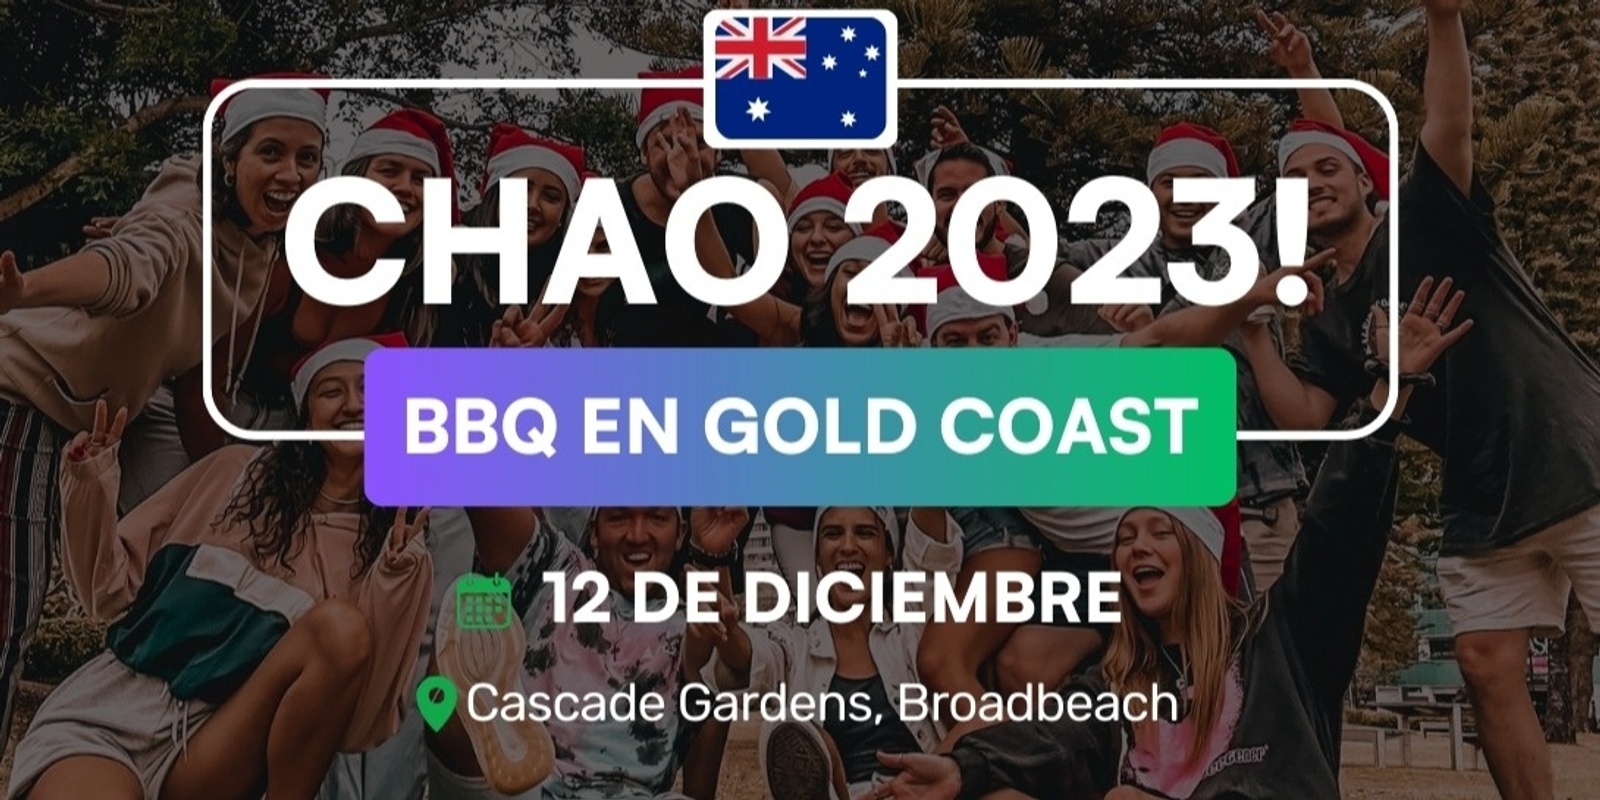 Banner image for Chao 2023!